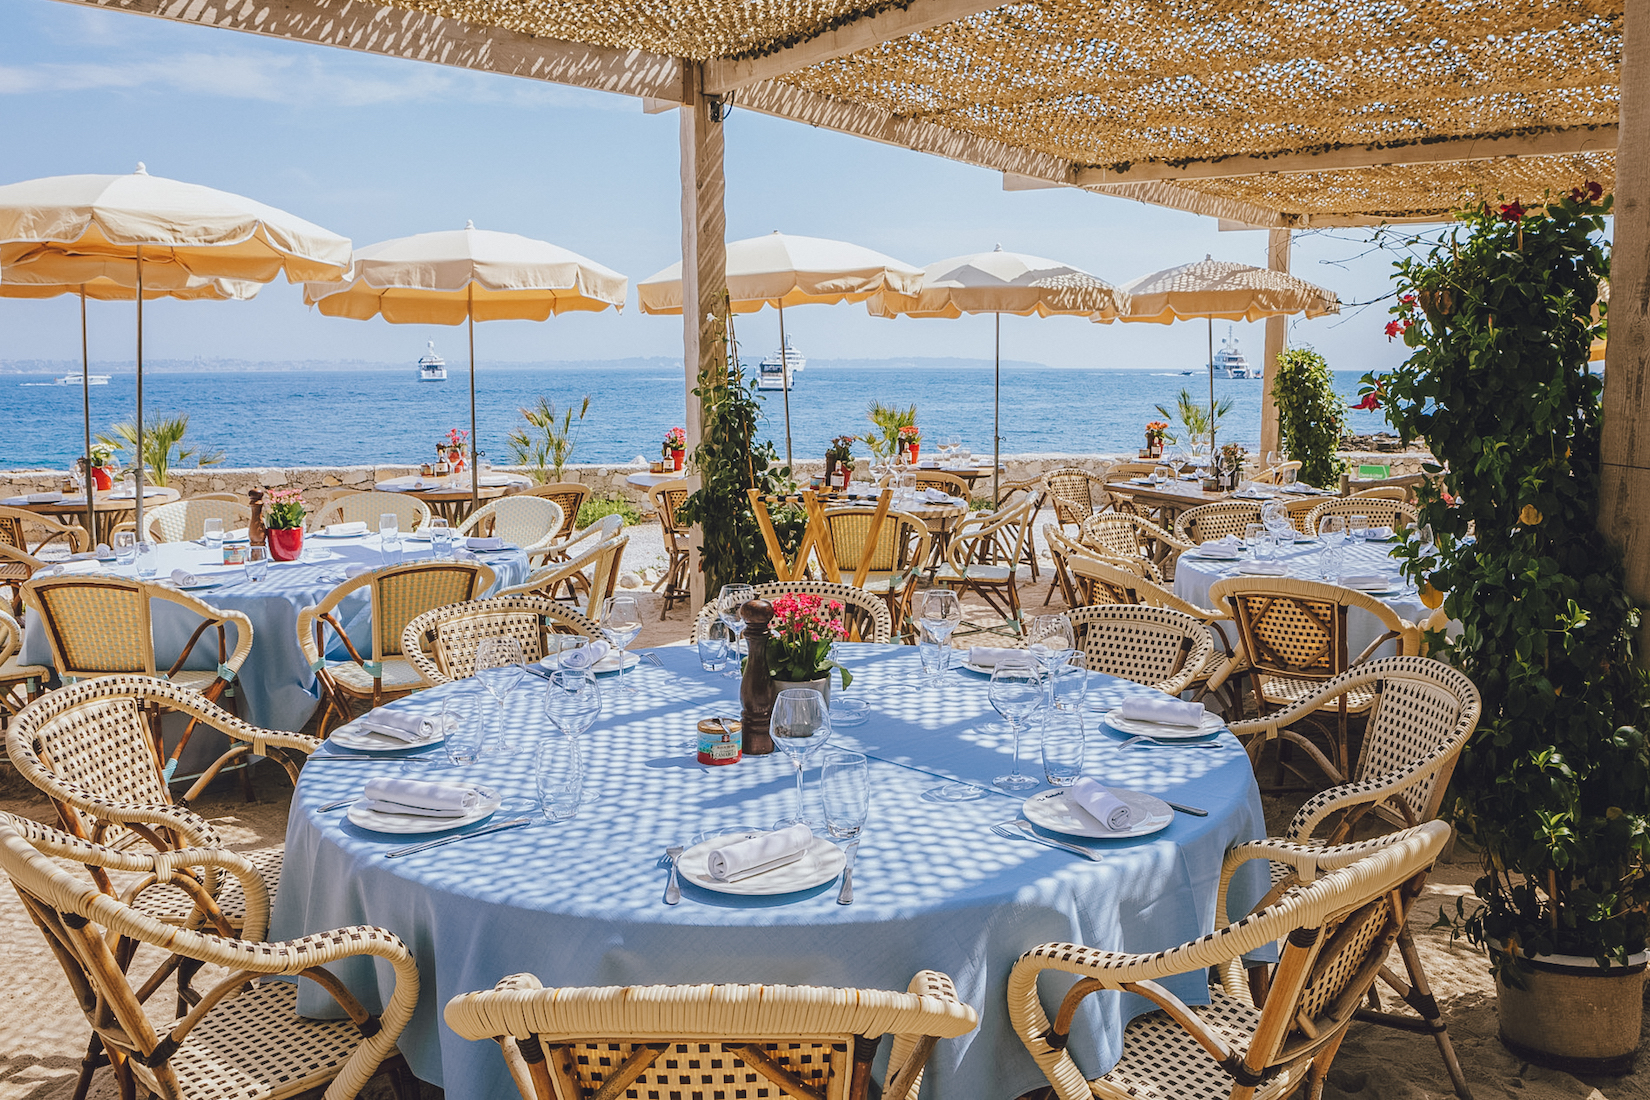 A Foodie Guide: Where To Eat On The French Riviera